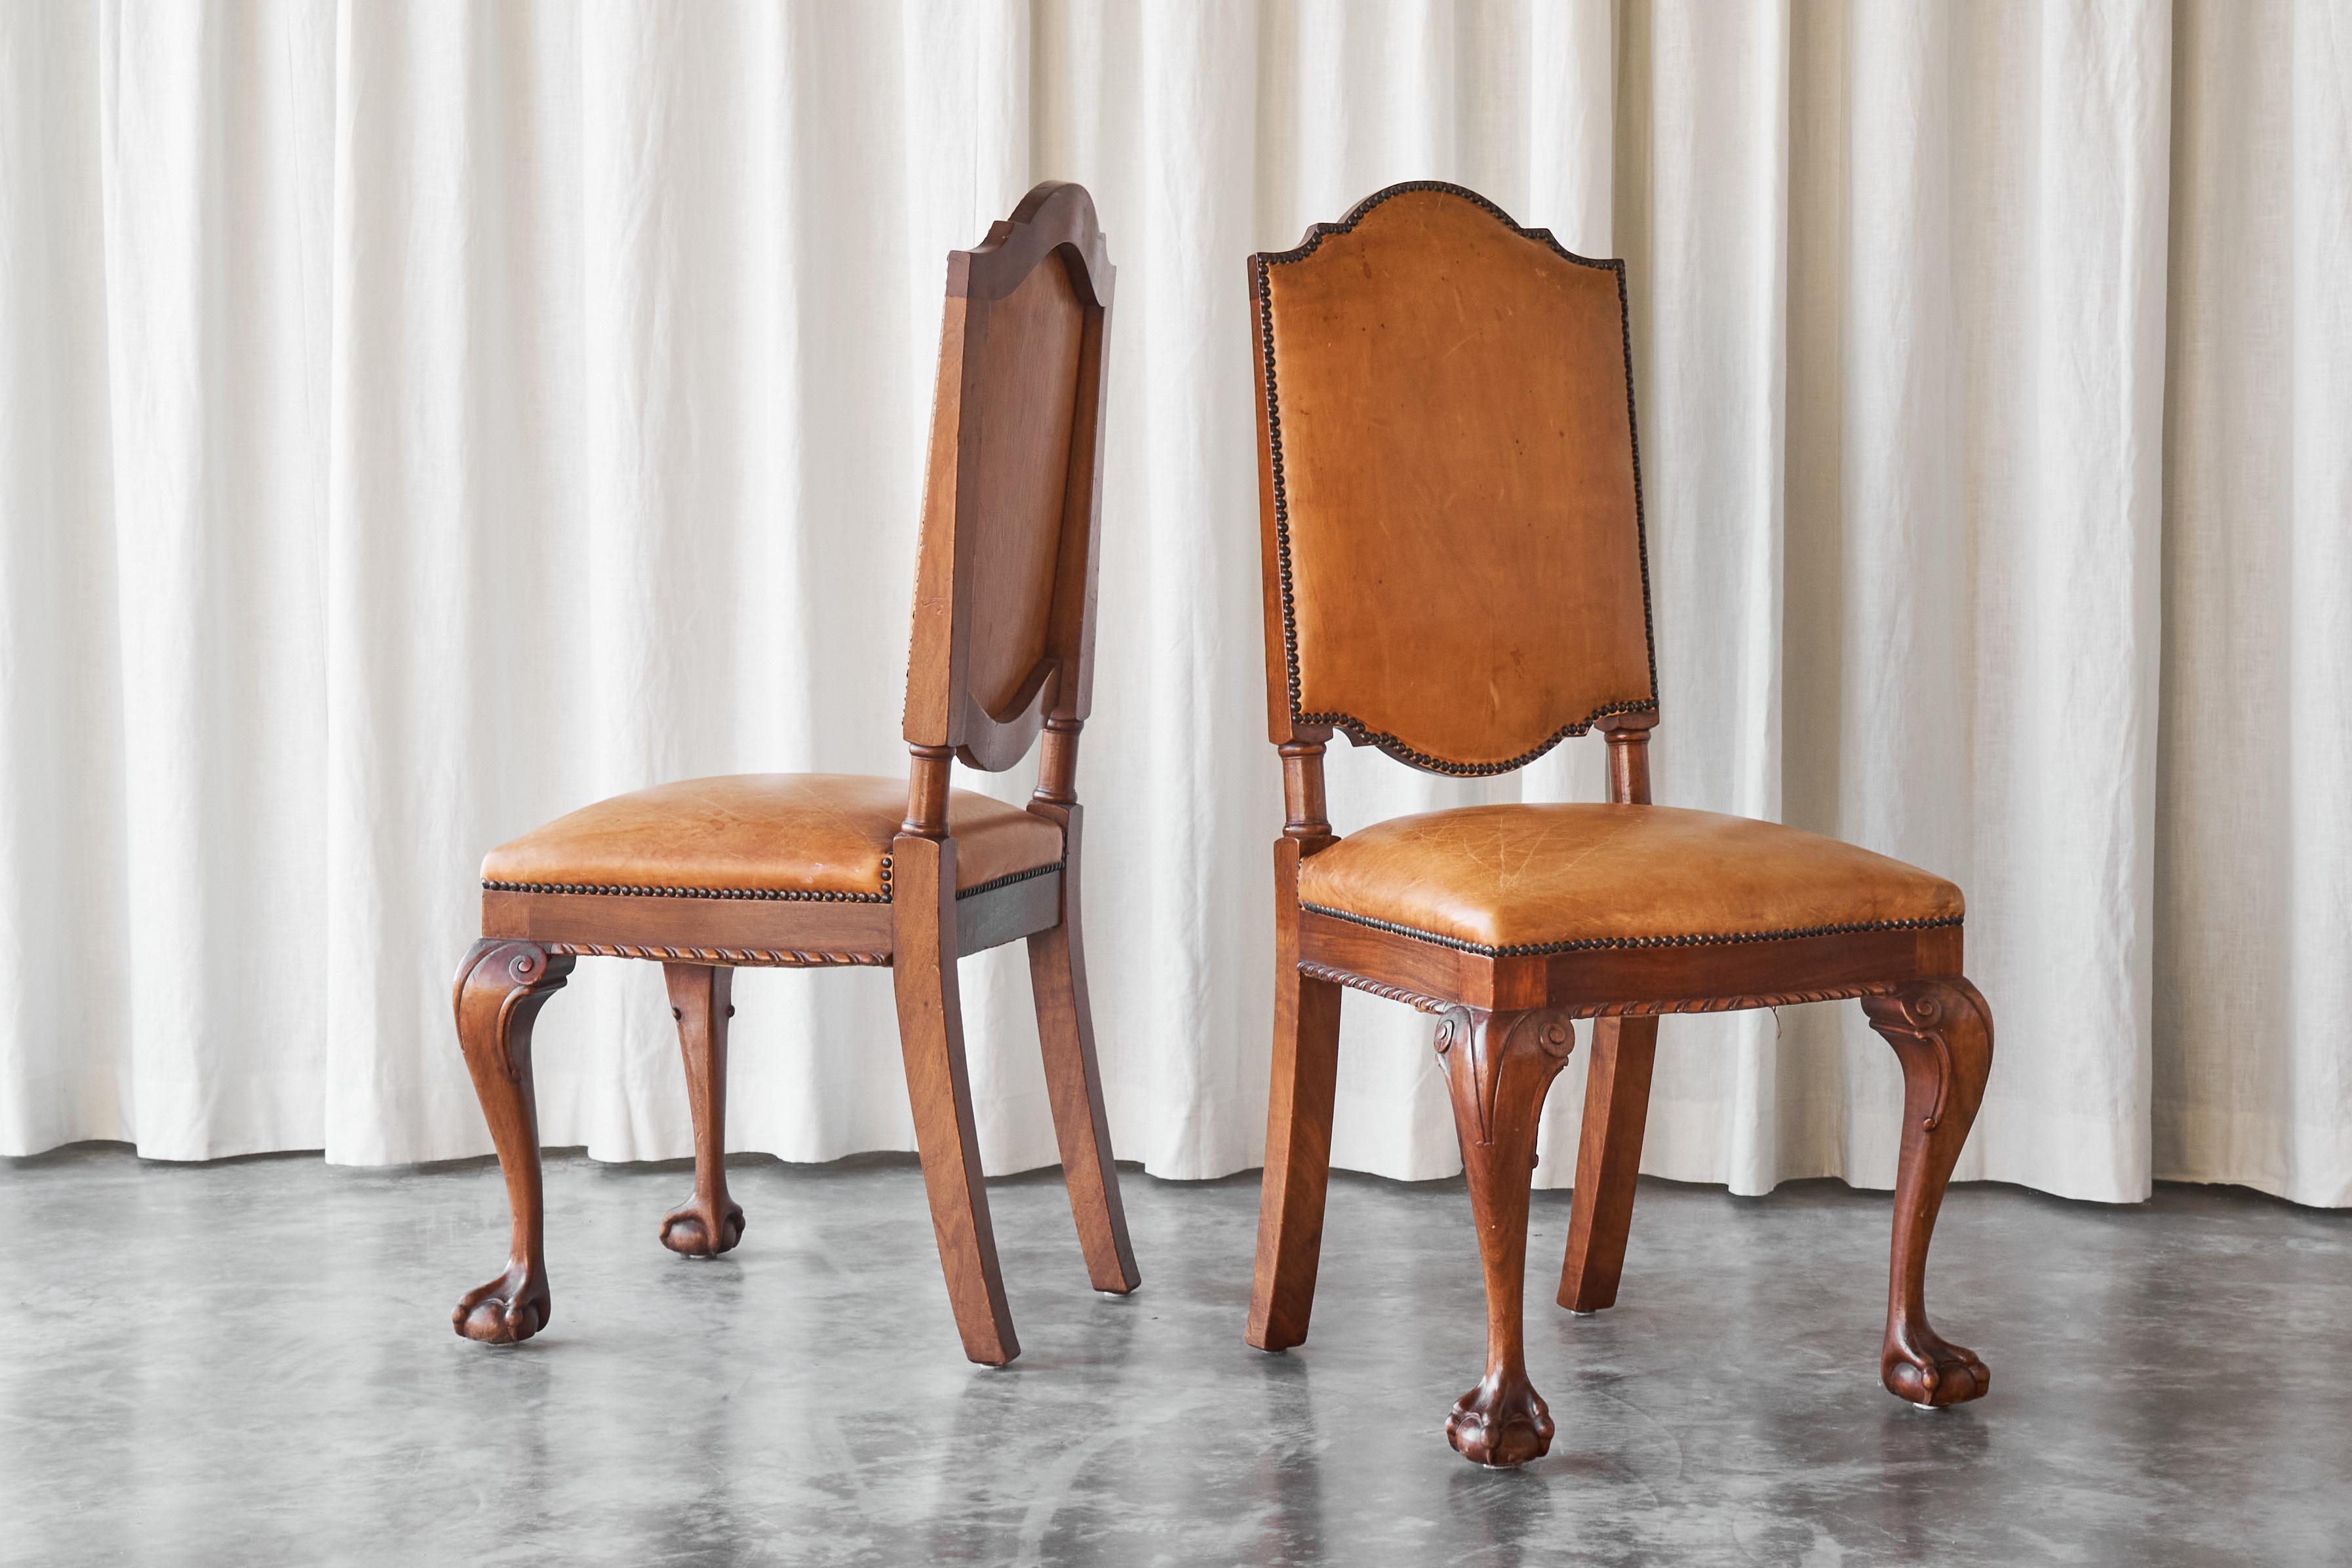 This is a very rare pair of 't Woonhuys Amsterdam side chairs in very desirable patinated cognac leather, made in the 1920s.

As Holland’s most illustrious furniture company in the early 20th century, ‘t Woonhuys in Amsterdam was famous for their